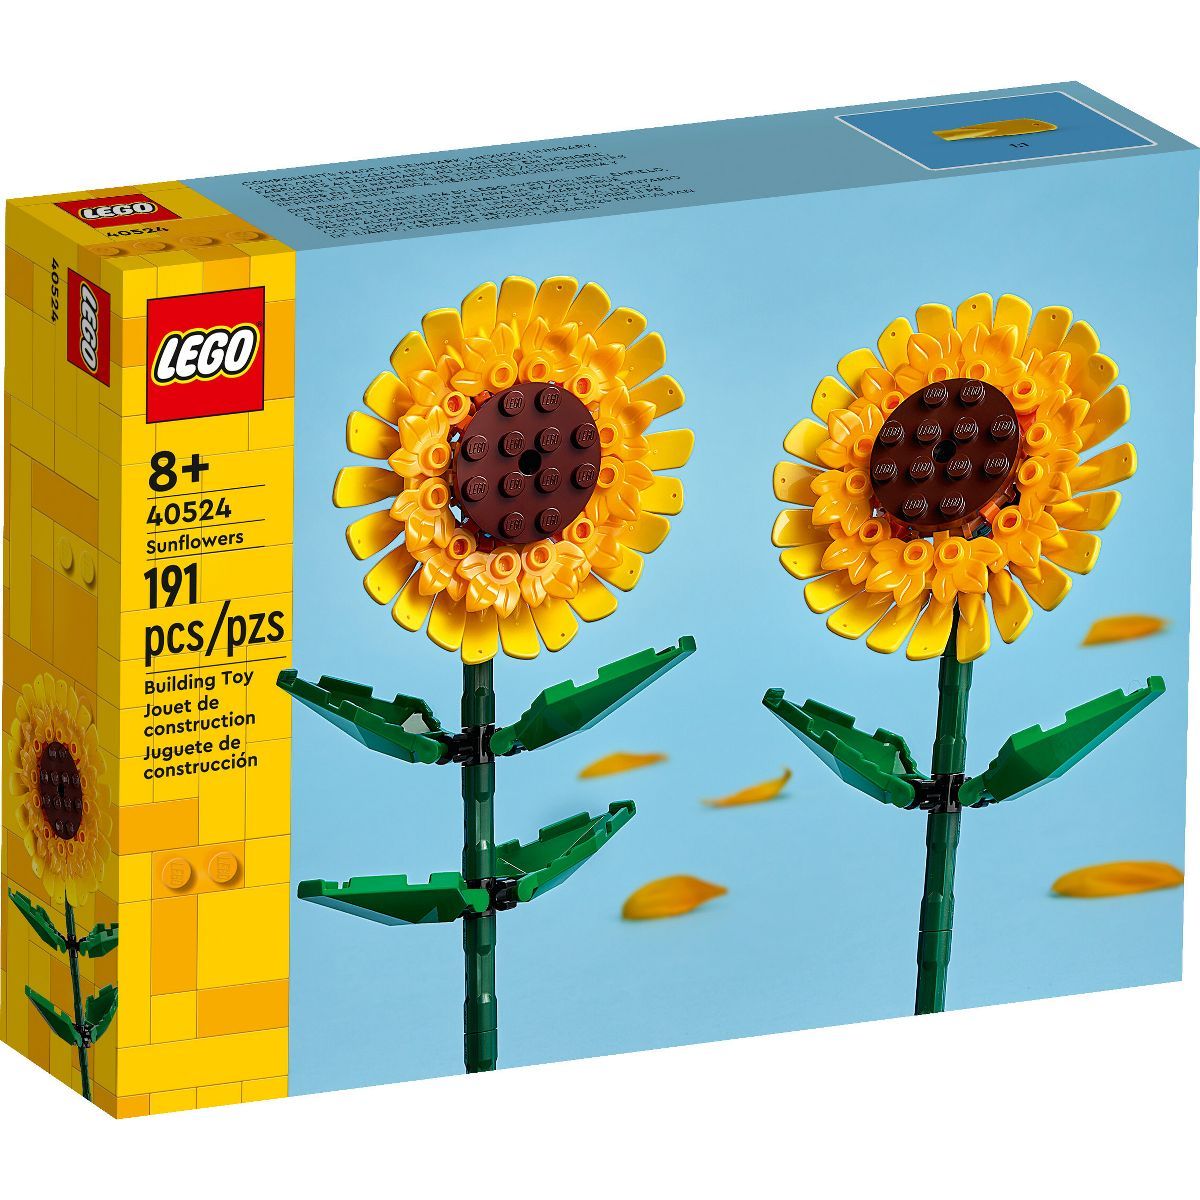 LEGO Sunflowers Building Toy Set 40524 | Target